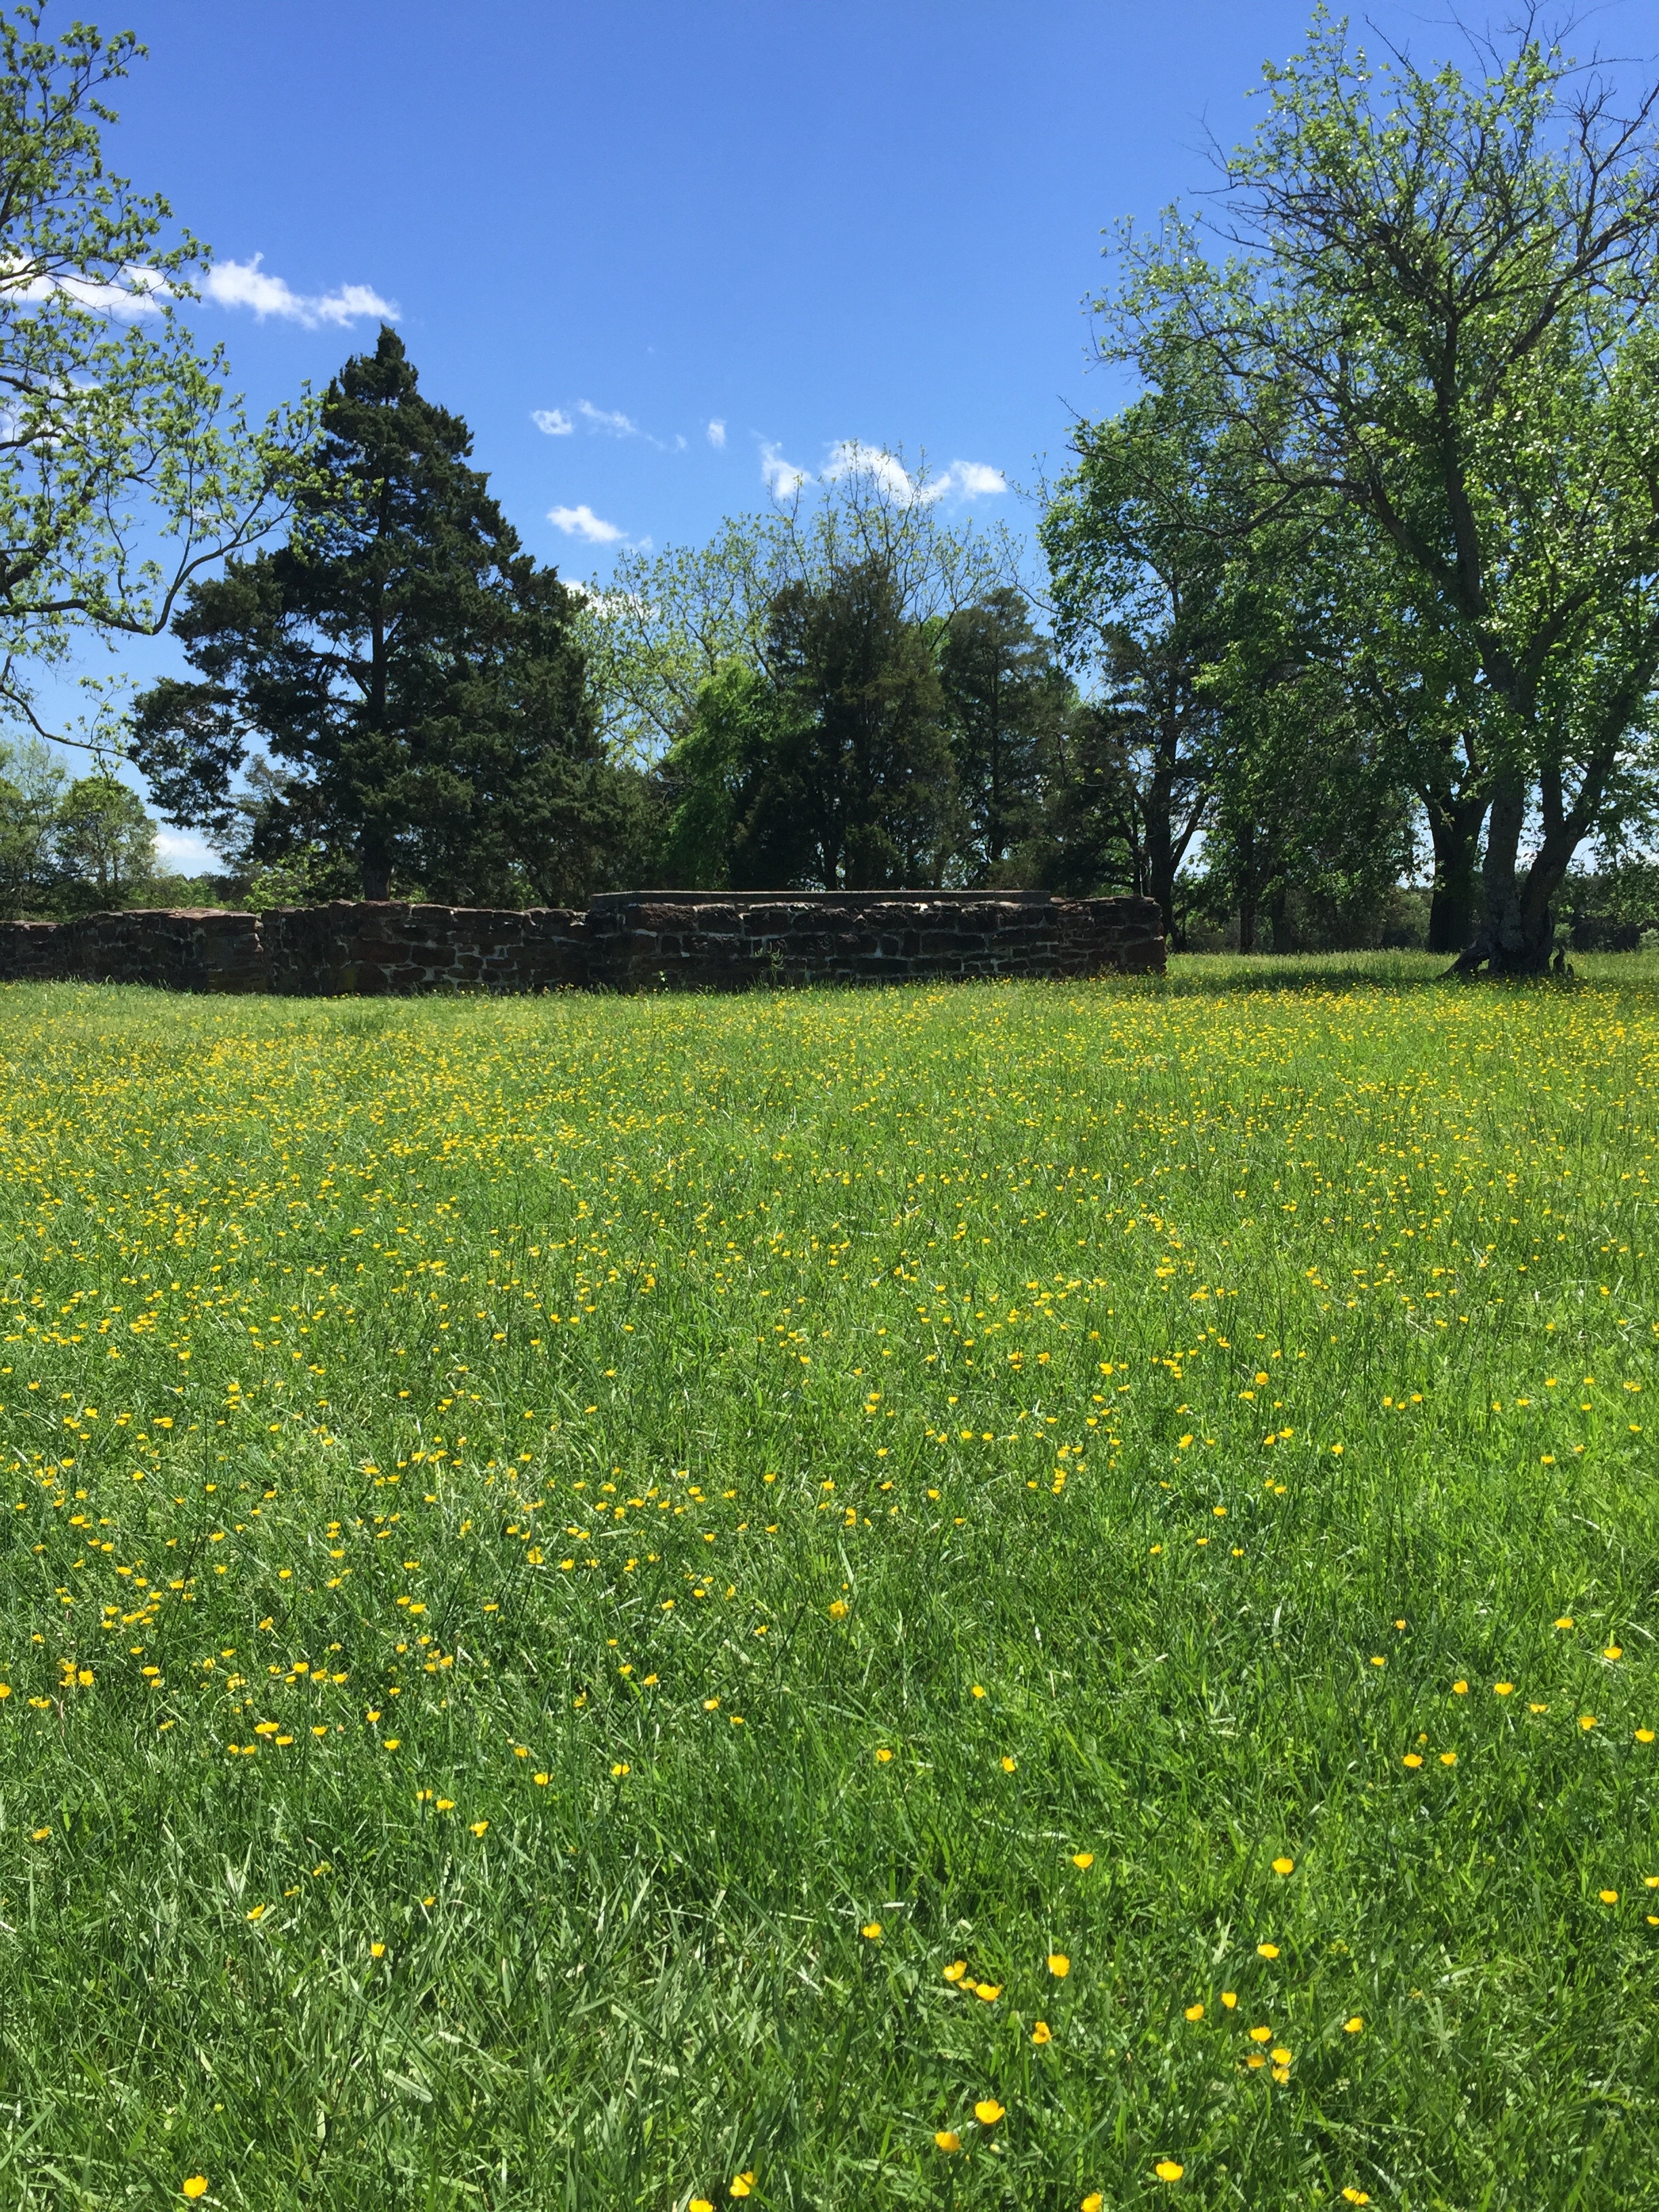 Buttercups and Cannon:  Day 2 – If These Stones Could Talk